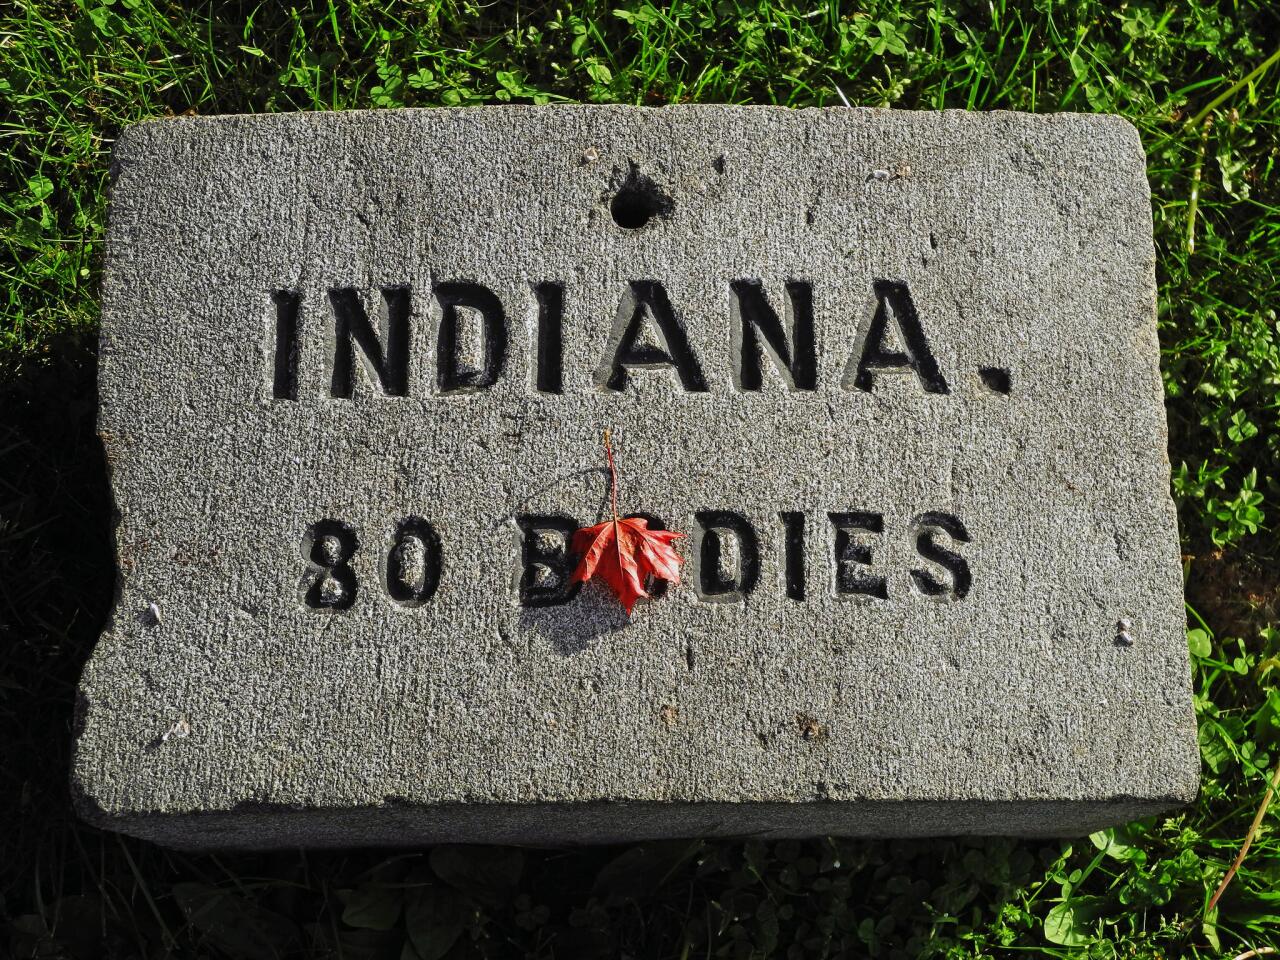 The Northern states, such as Indiana, contributed to the creation of the Soldiers' National Cemetery on the south edge of Gettysburg, Pa. The cemetery was dedicated on Nov. 19, 1863, but it was not completed until 1869. Of the 3,500 Union soldiers who died, 1,664 were never identified.